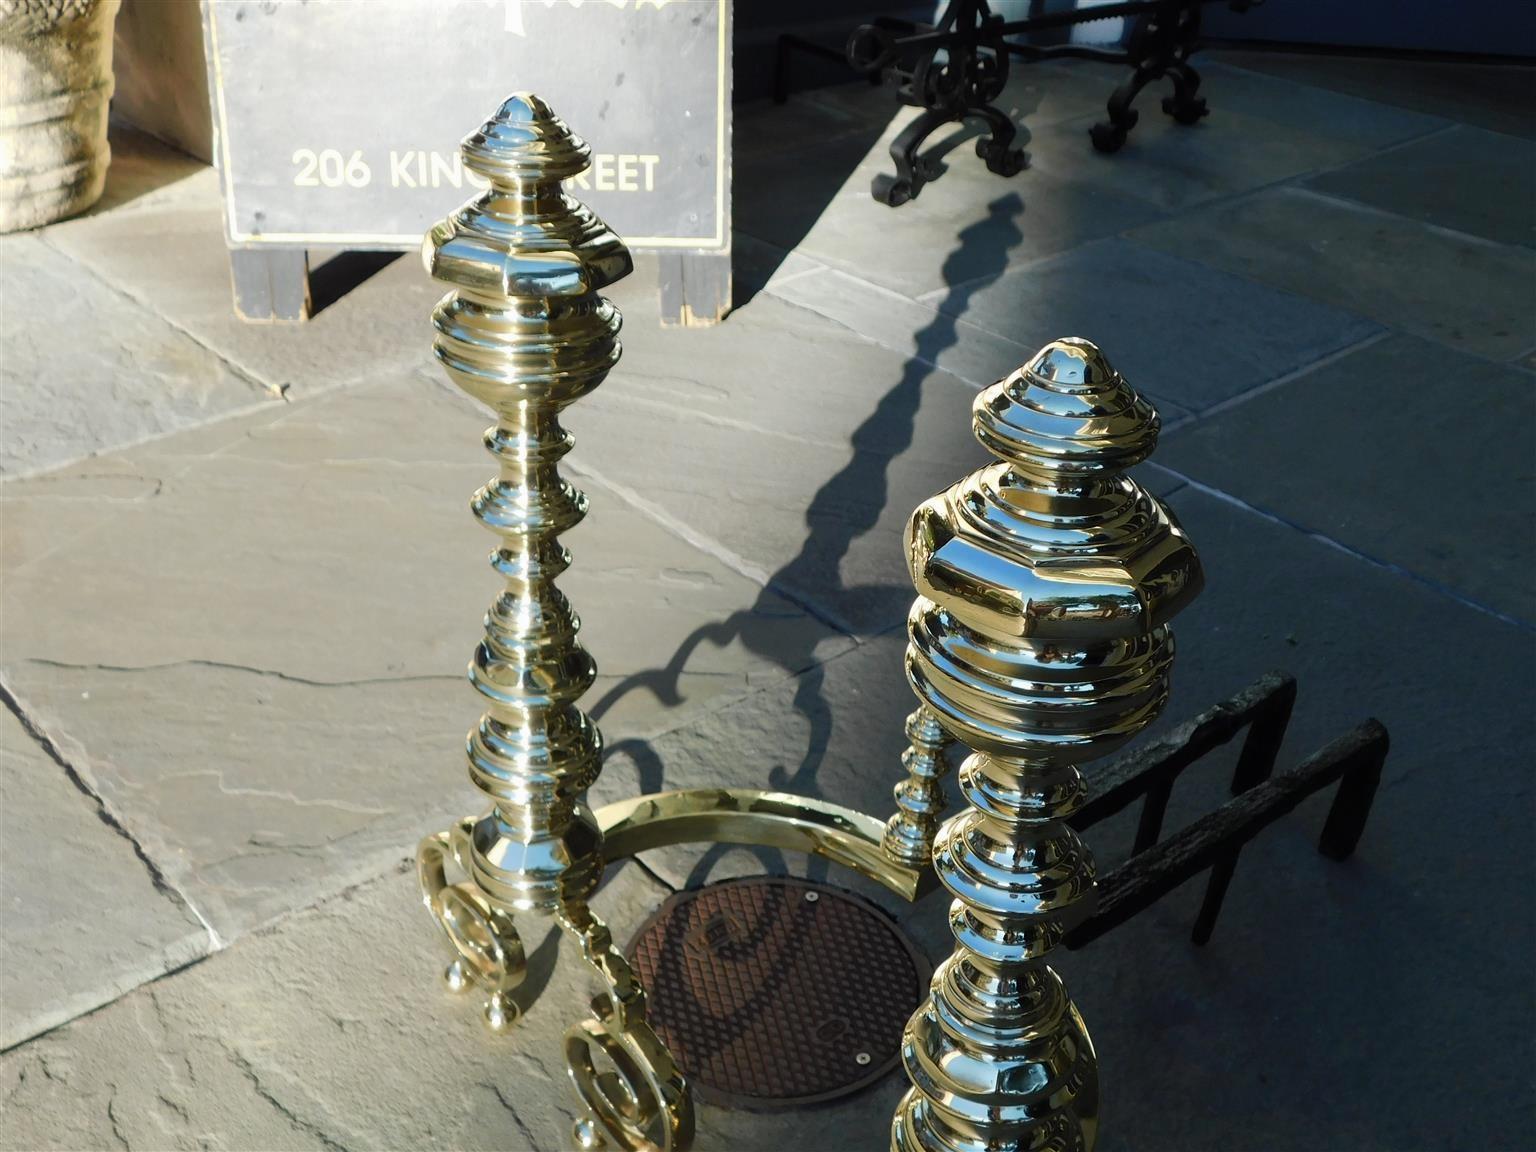 Cast Pair of American Brass Faceted Finial Andirons with Scrolled Ball Legs, C. 1820 For Sale